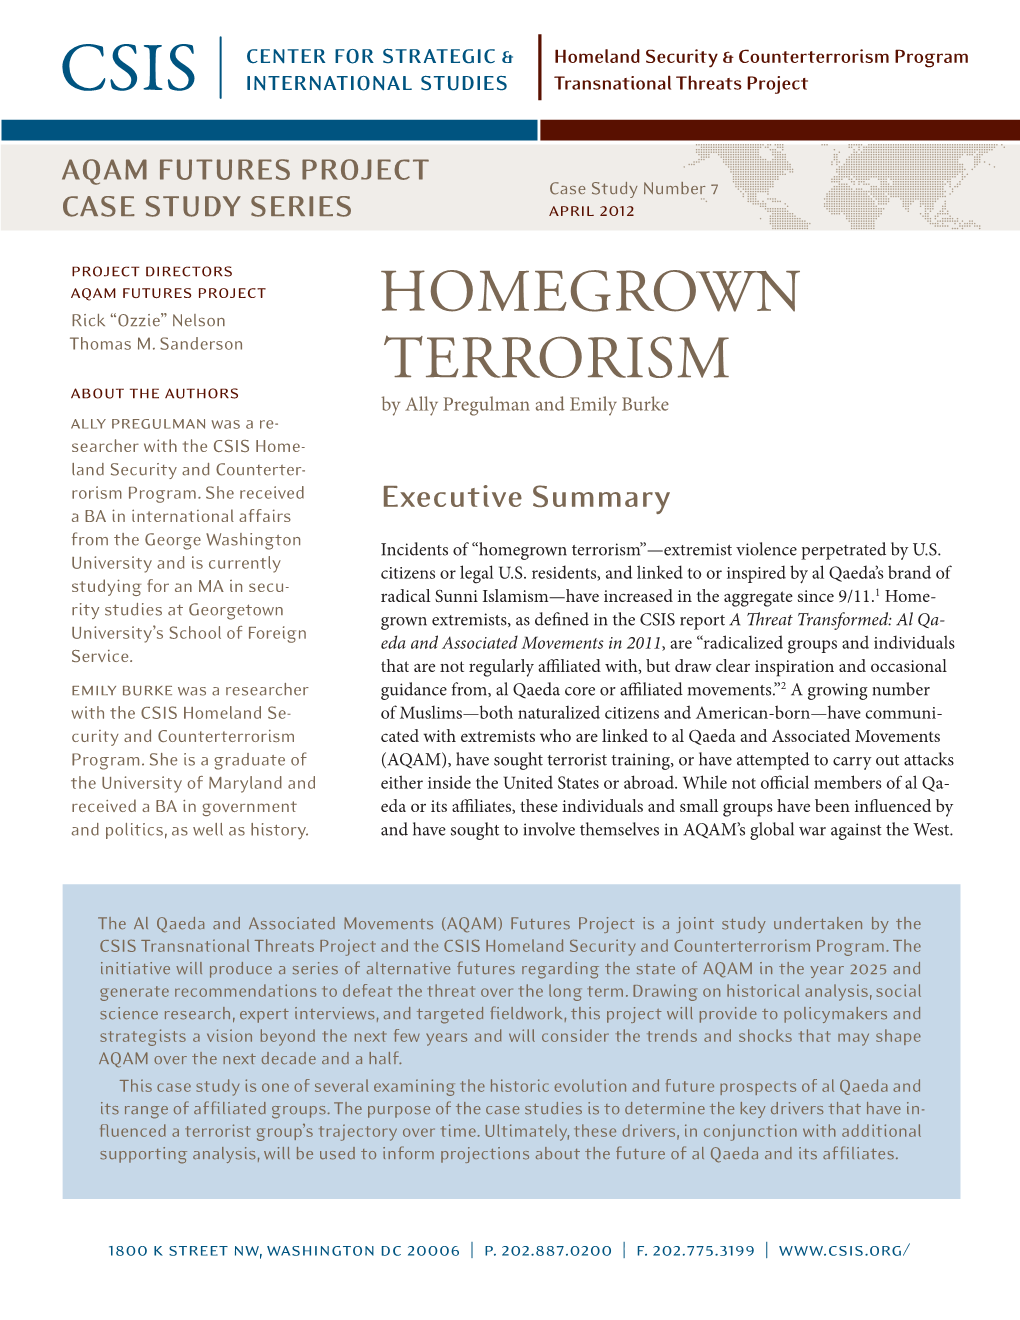 Homegrown Terrorism”—Extremist Violence Perpetrated by U.S